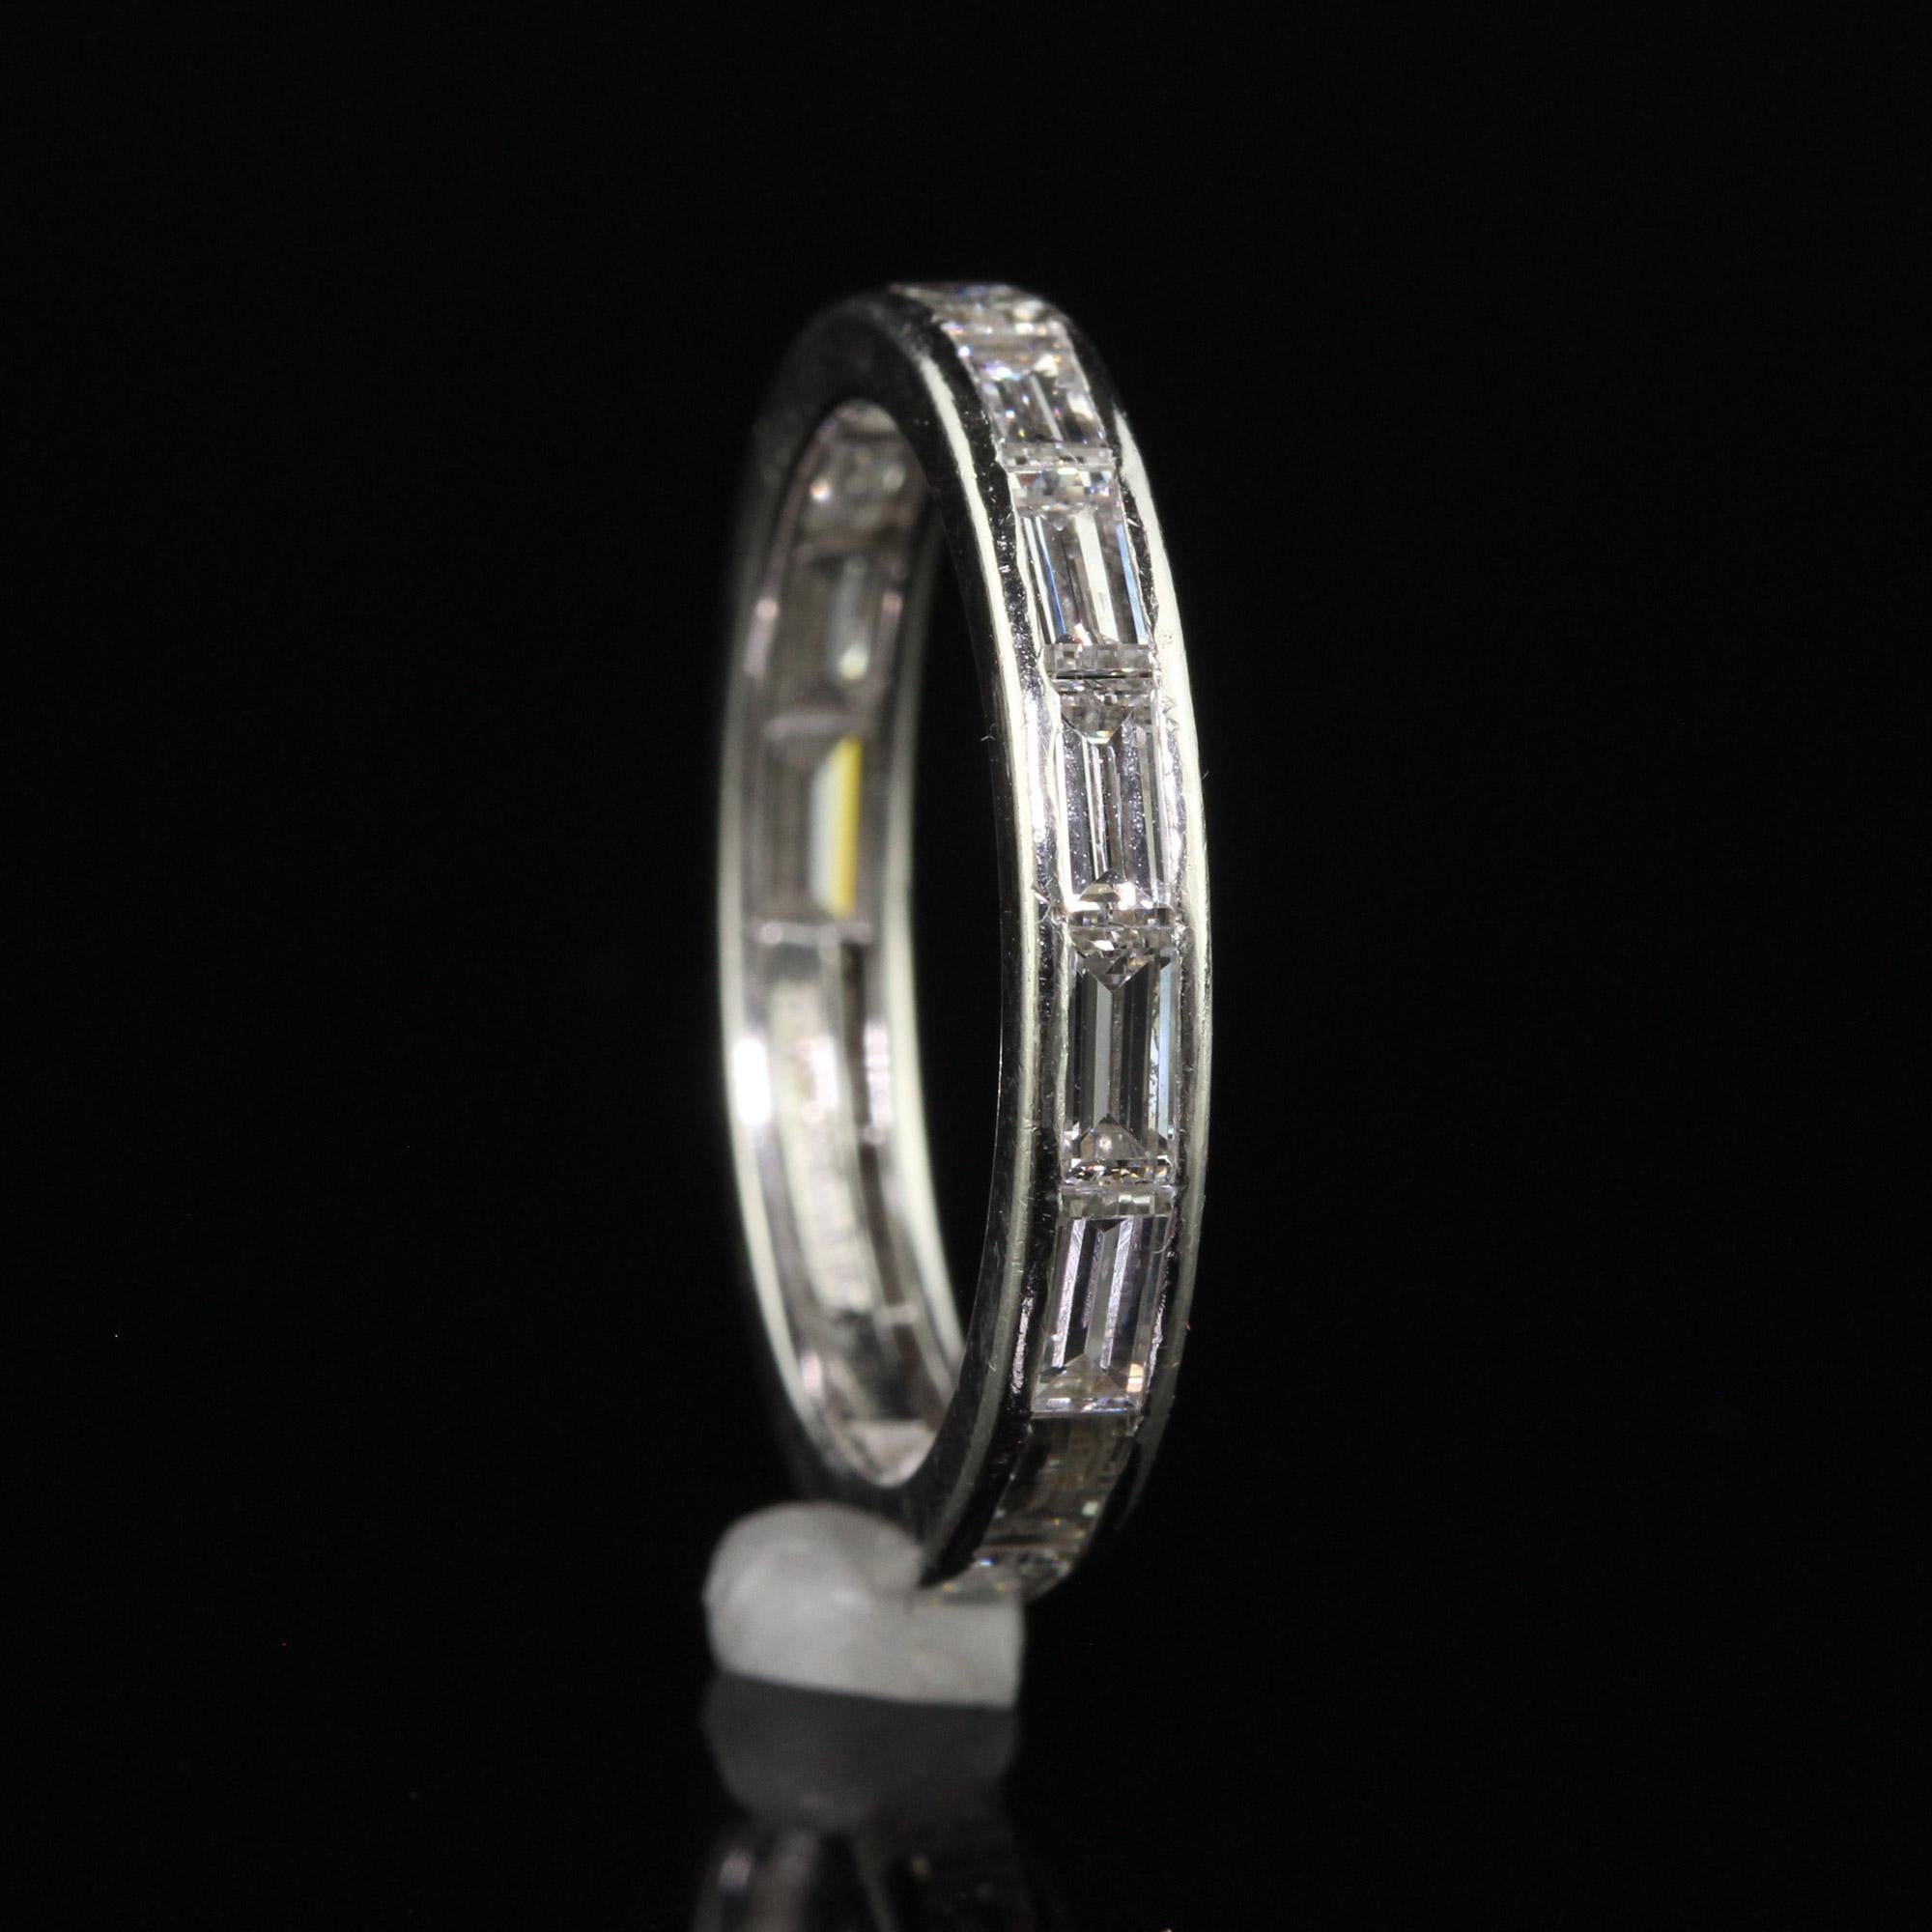 Antique Art Deco Tiffany and Co Baguette Diamond Wedding Band - Size 6 1